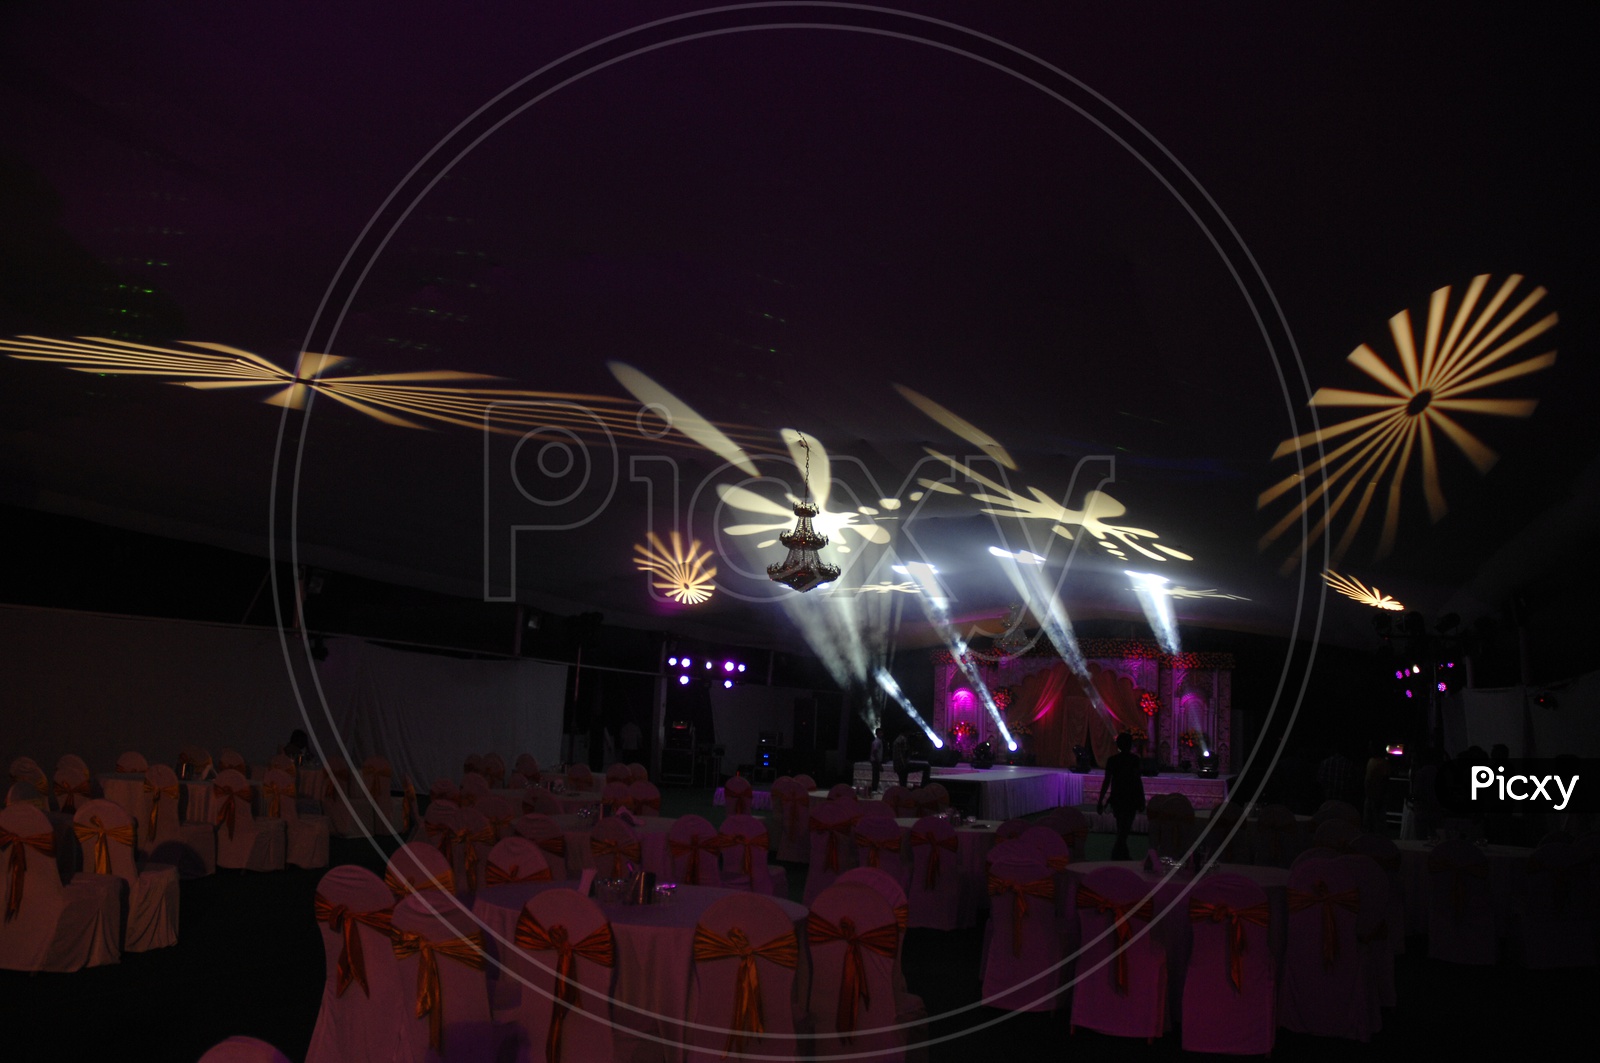 A Well Decorated Function Hall Or Banquet Hall